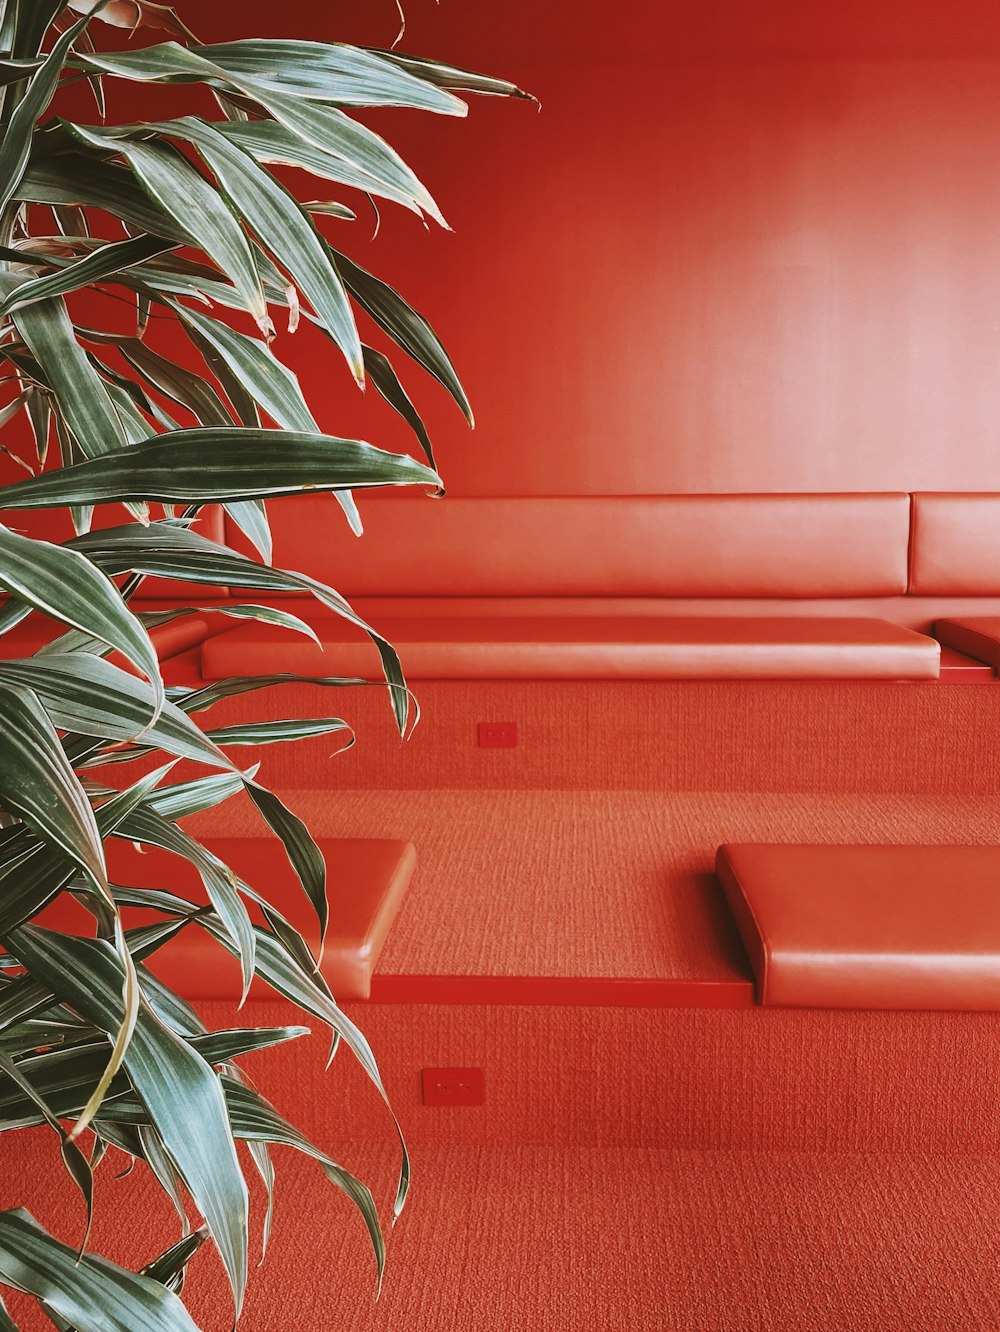 green plant on red couch